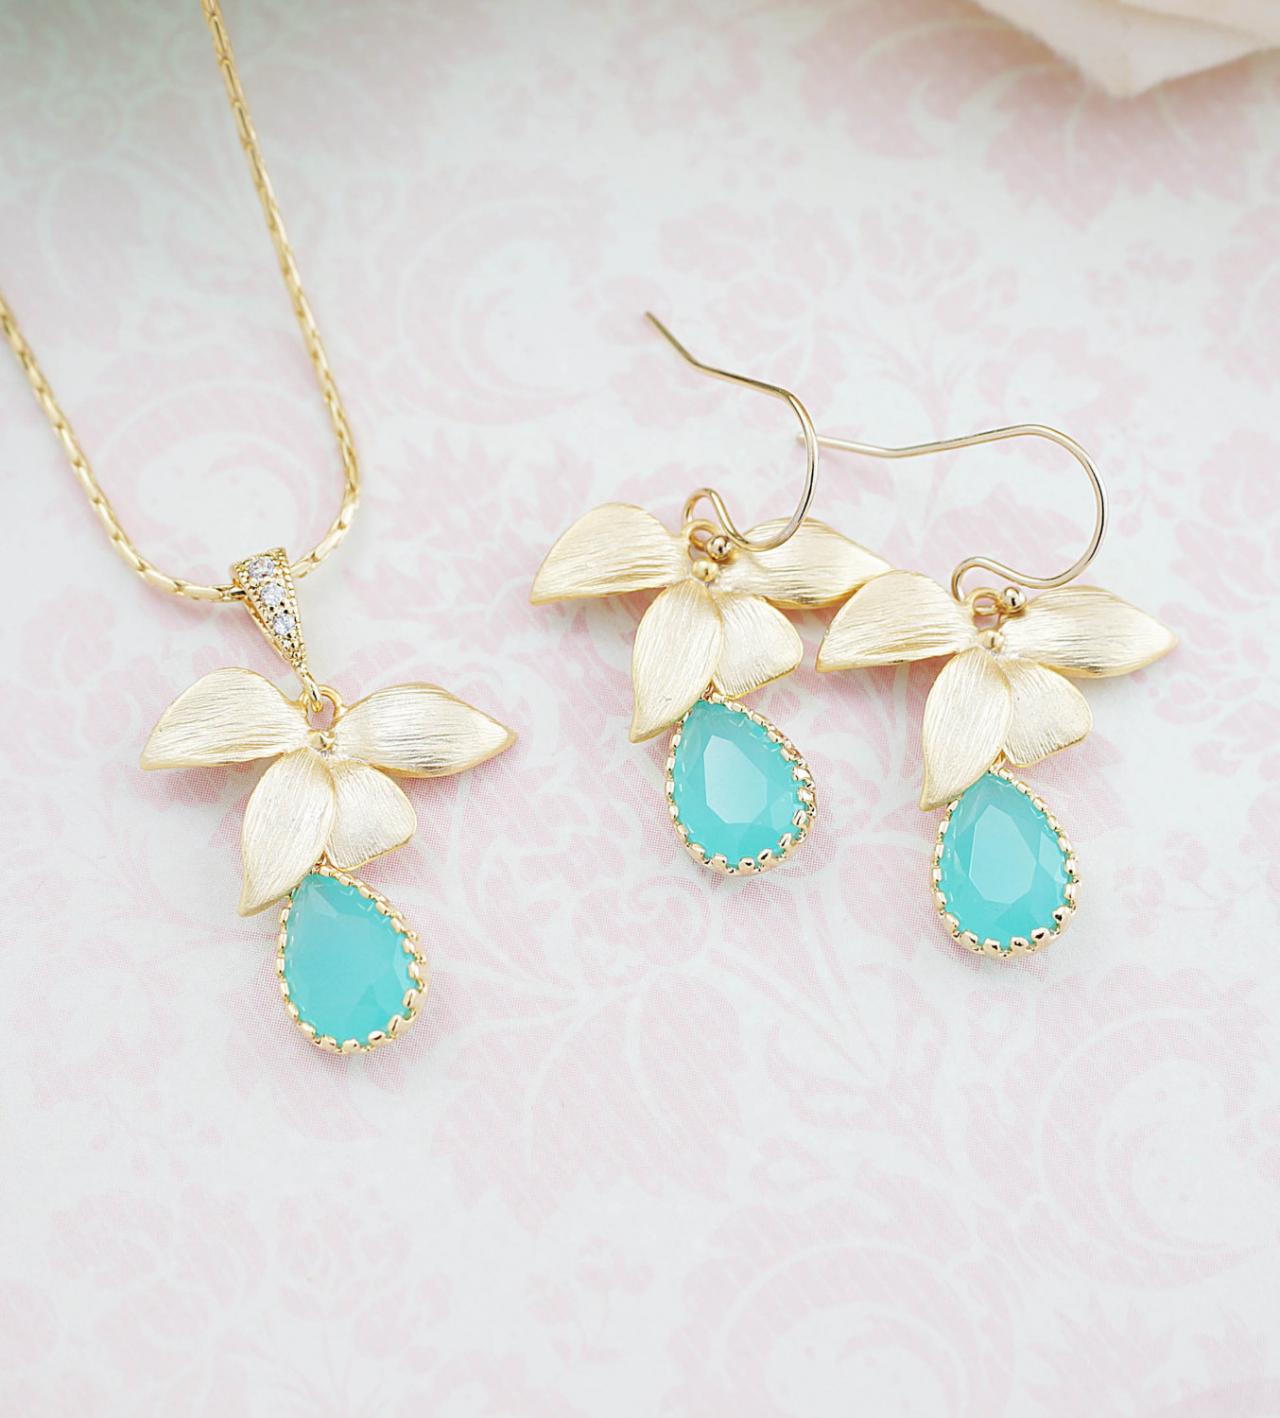 Mint Opal Glass Drops With Gold Flower Dangle Earrings And Necklace Jewelry Set Bridesmaid Gifts Bridesmaid Jewelry Weddings Christmas